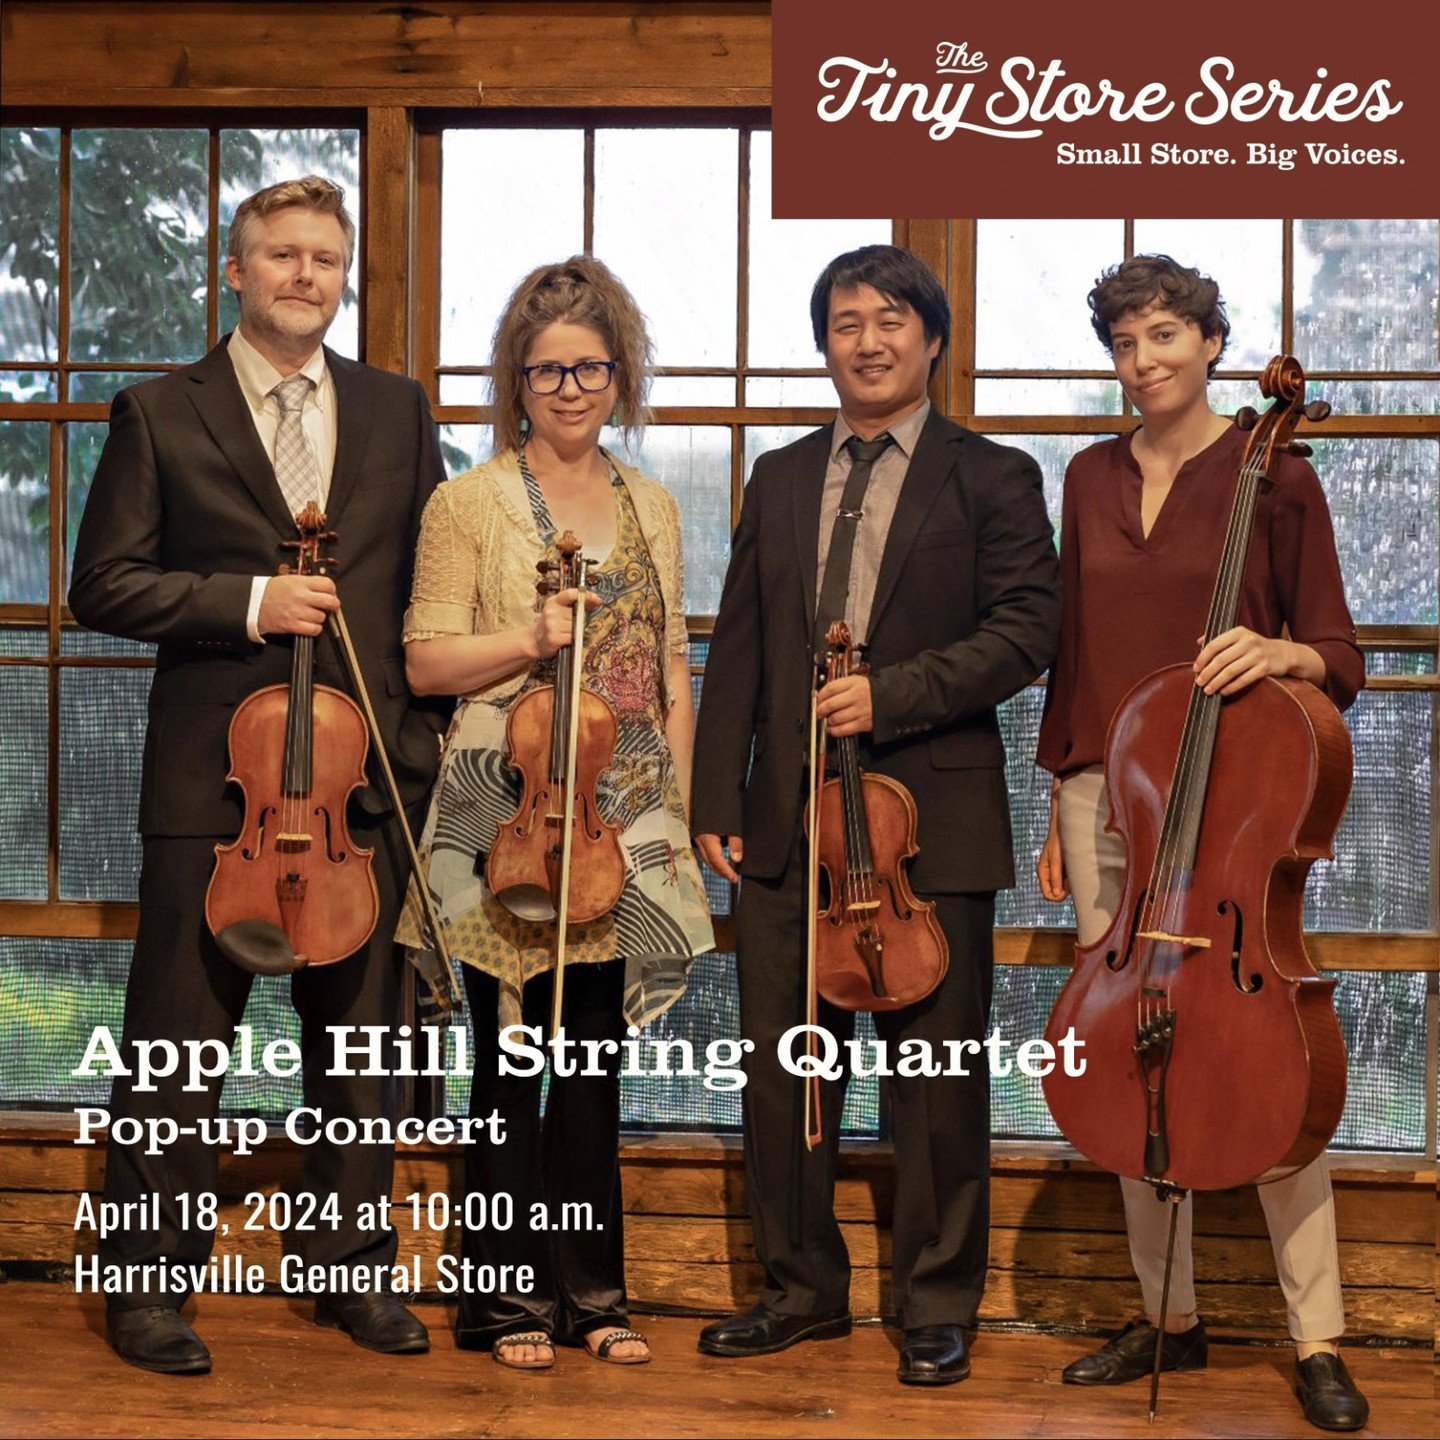 Stop by the store tomorrow at 10 a.m. for breakfast and a special pop-up concert by the Apple Hill String Quartet. The Quartet is one of New Hampshire&rsquo;s cultural gems and has been called &ldquo;dashing and extraordinary&rdquo; by the Strad maga